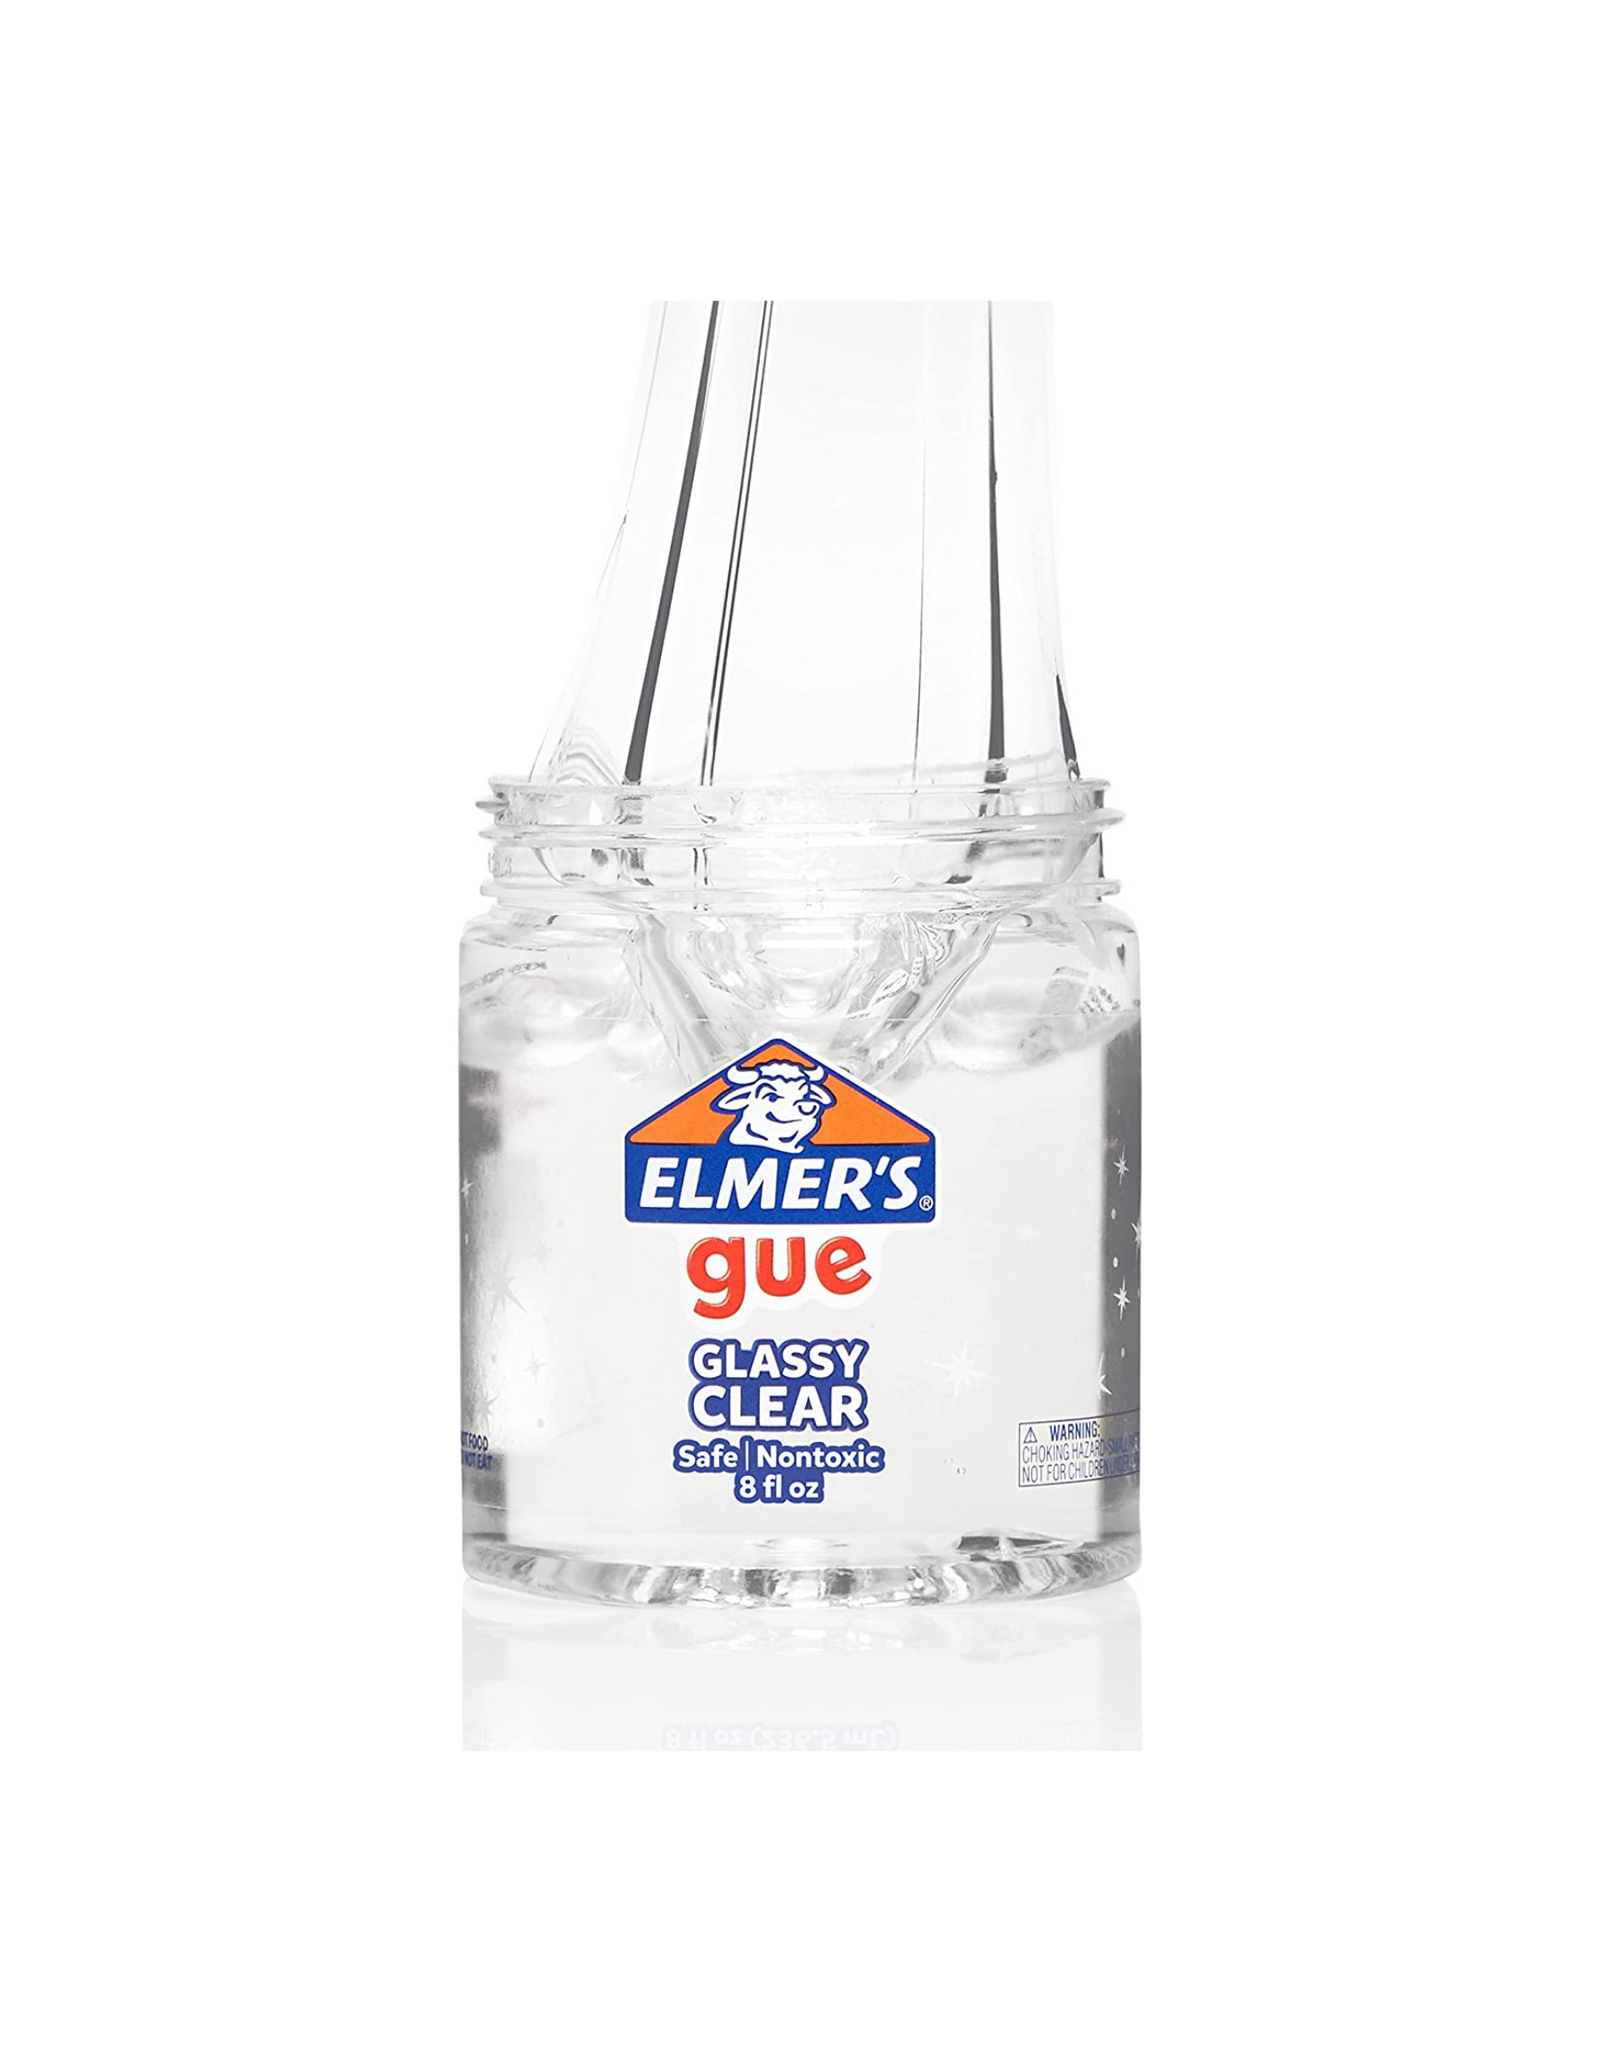 Elmer's Glue Pre Made Slime, Glassy Clear Slime, Great for Mixing